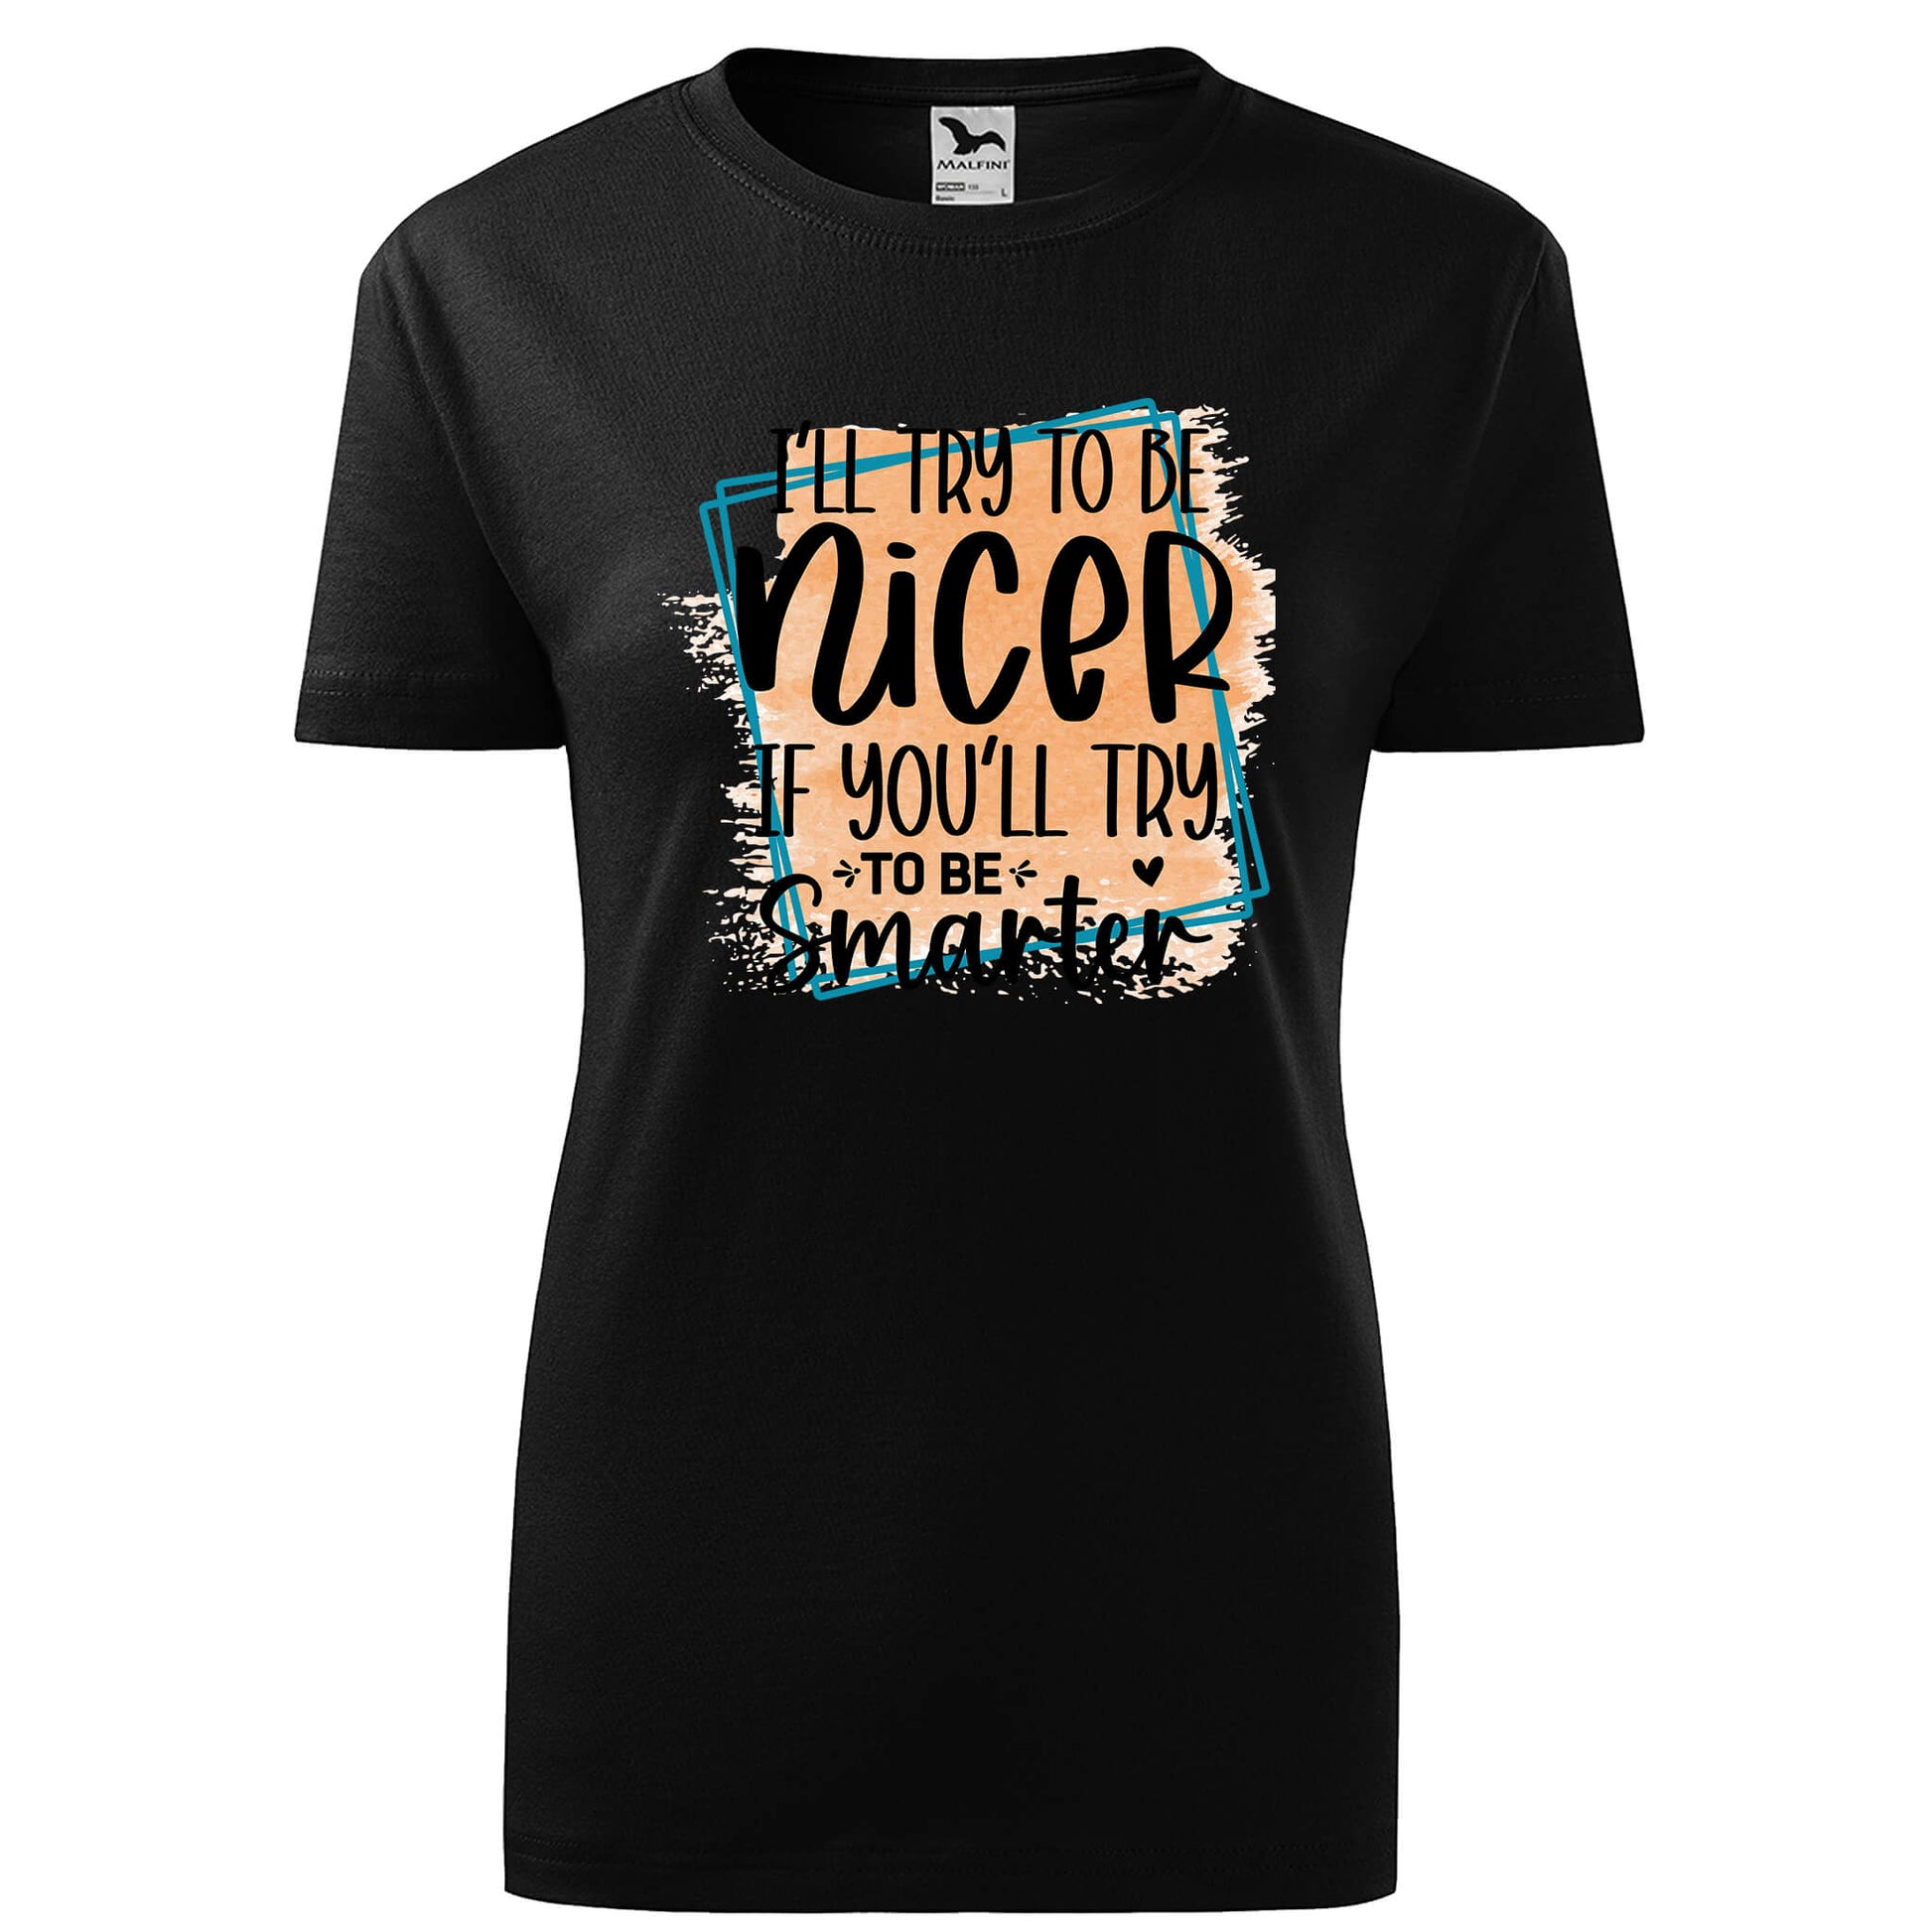 Ill try to be nicer t-shirt - rvdesignprint